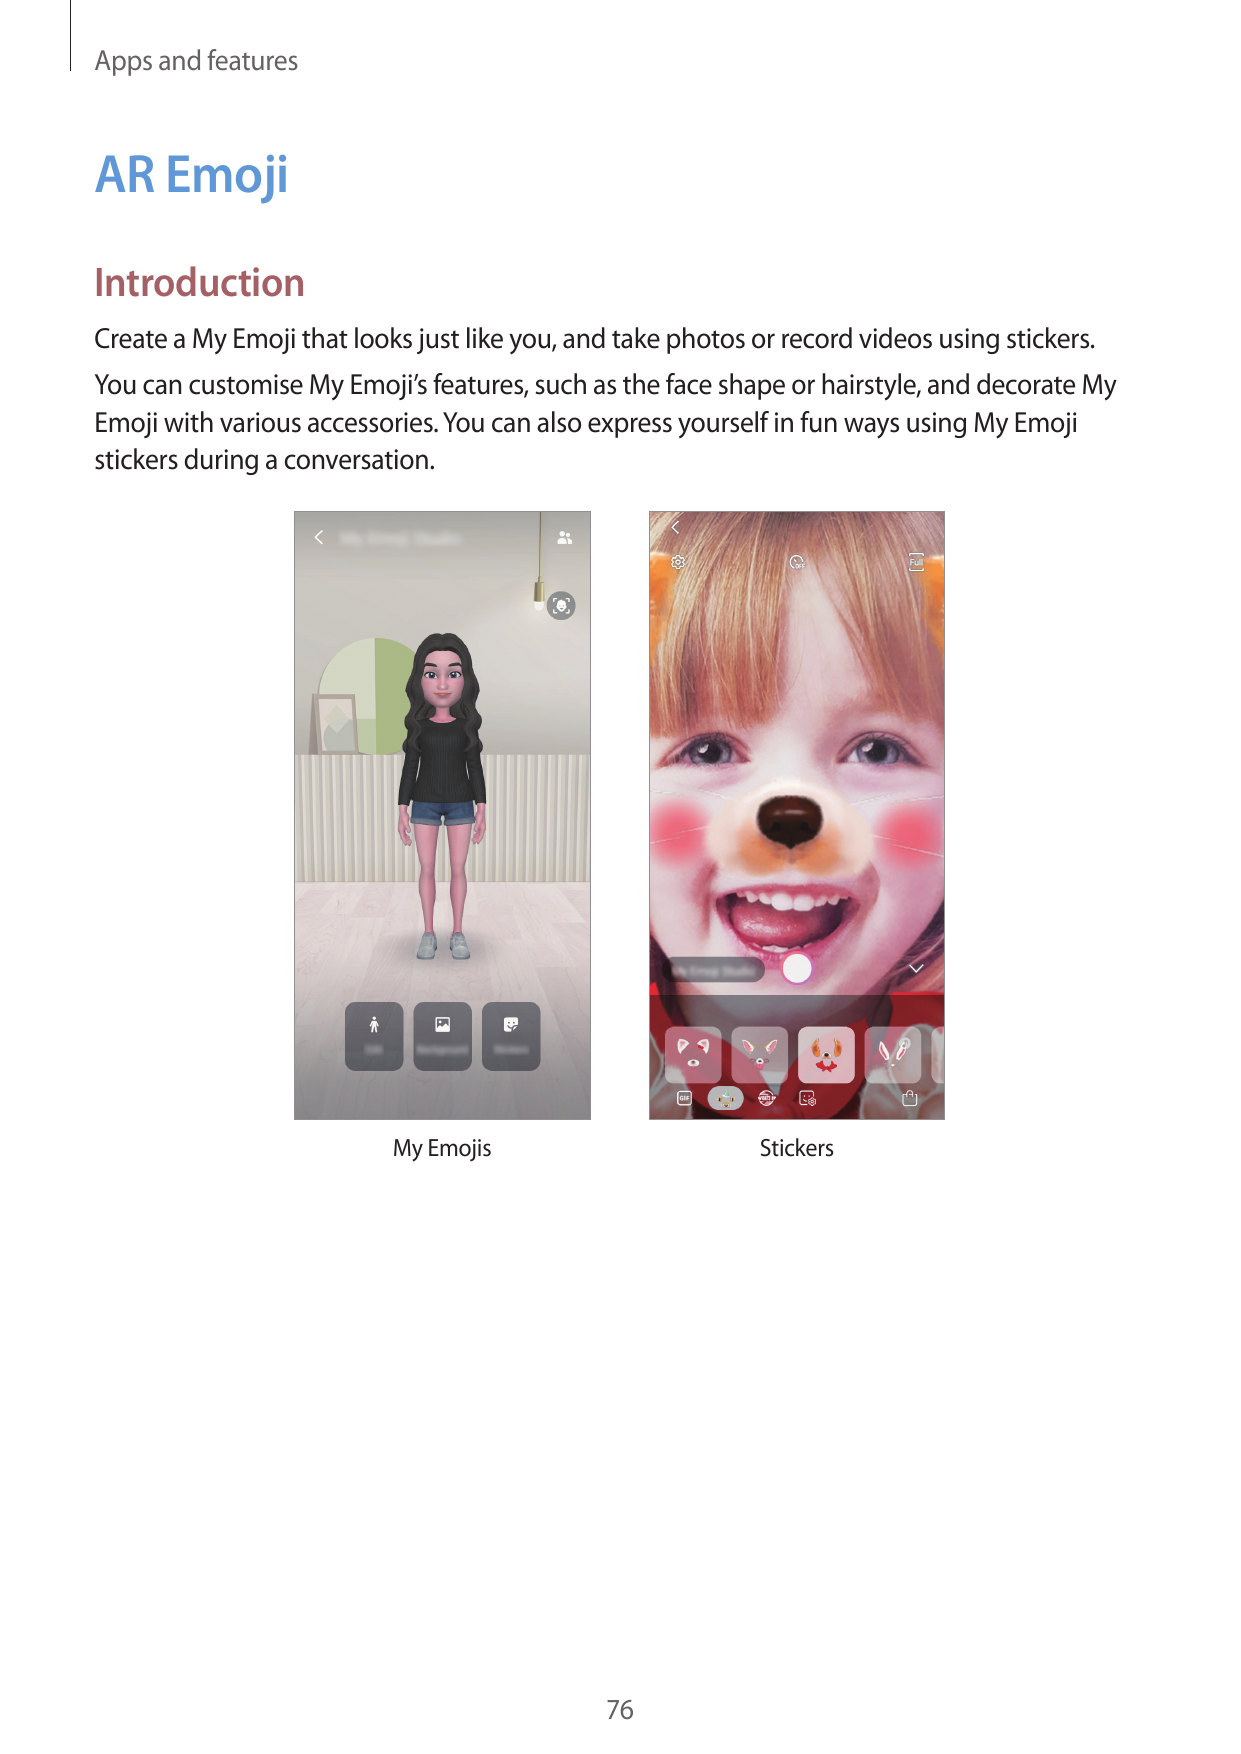 Apps and featuresAR EmojiIntroductionCreate a My Emoji that looks just like you, and take photos or record videos using stickers